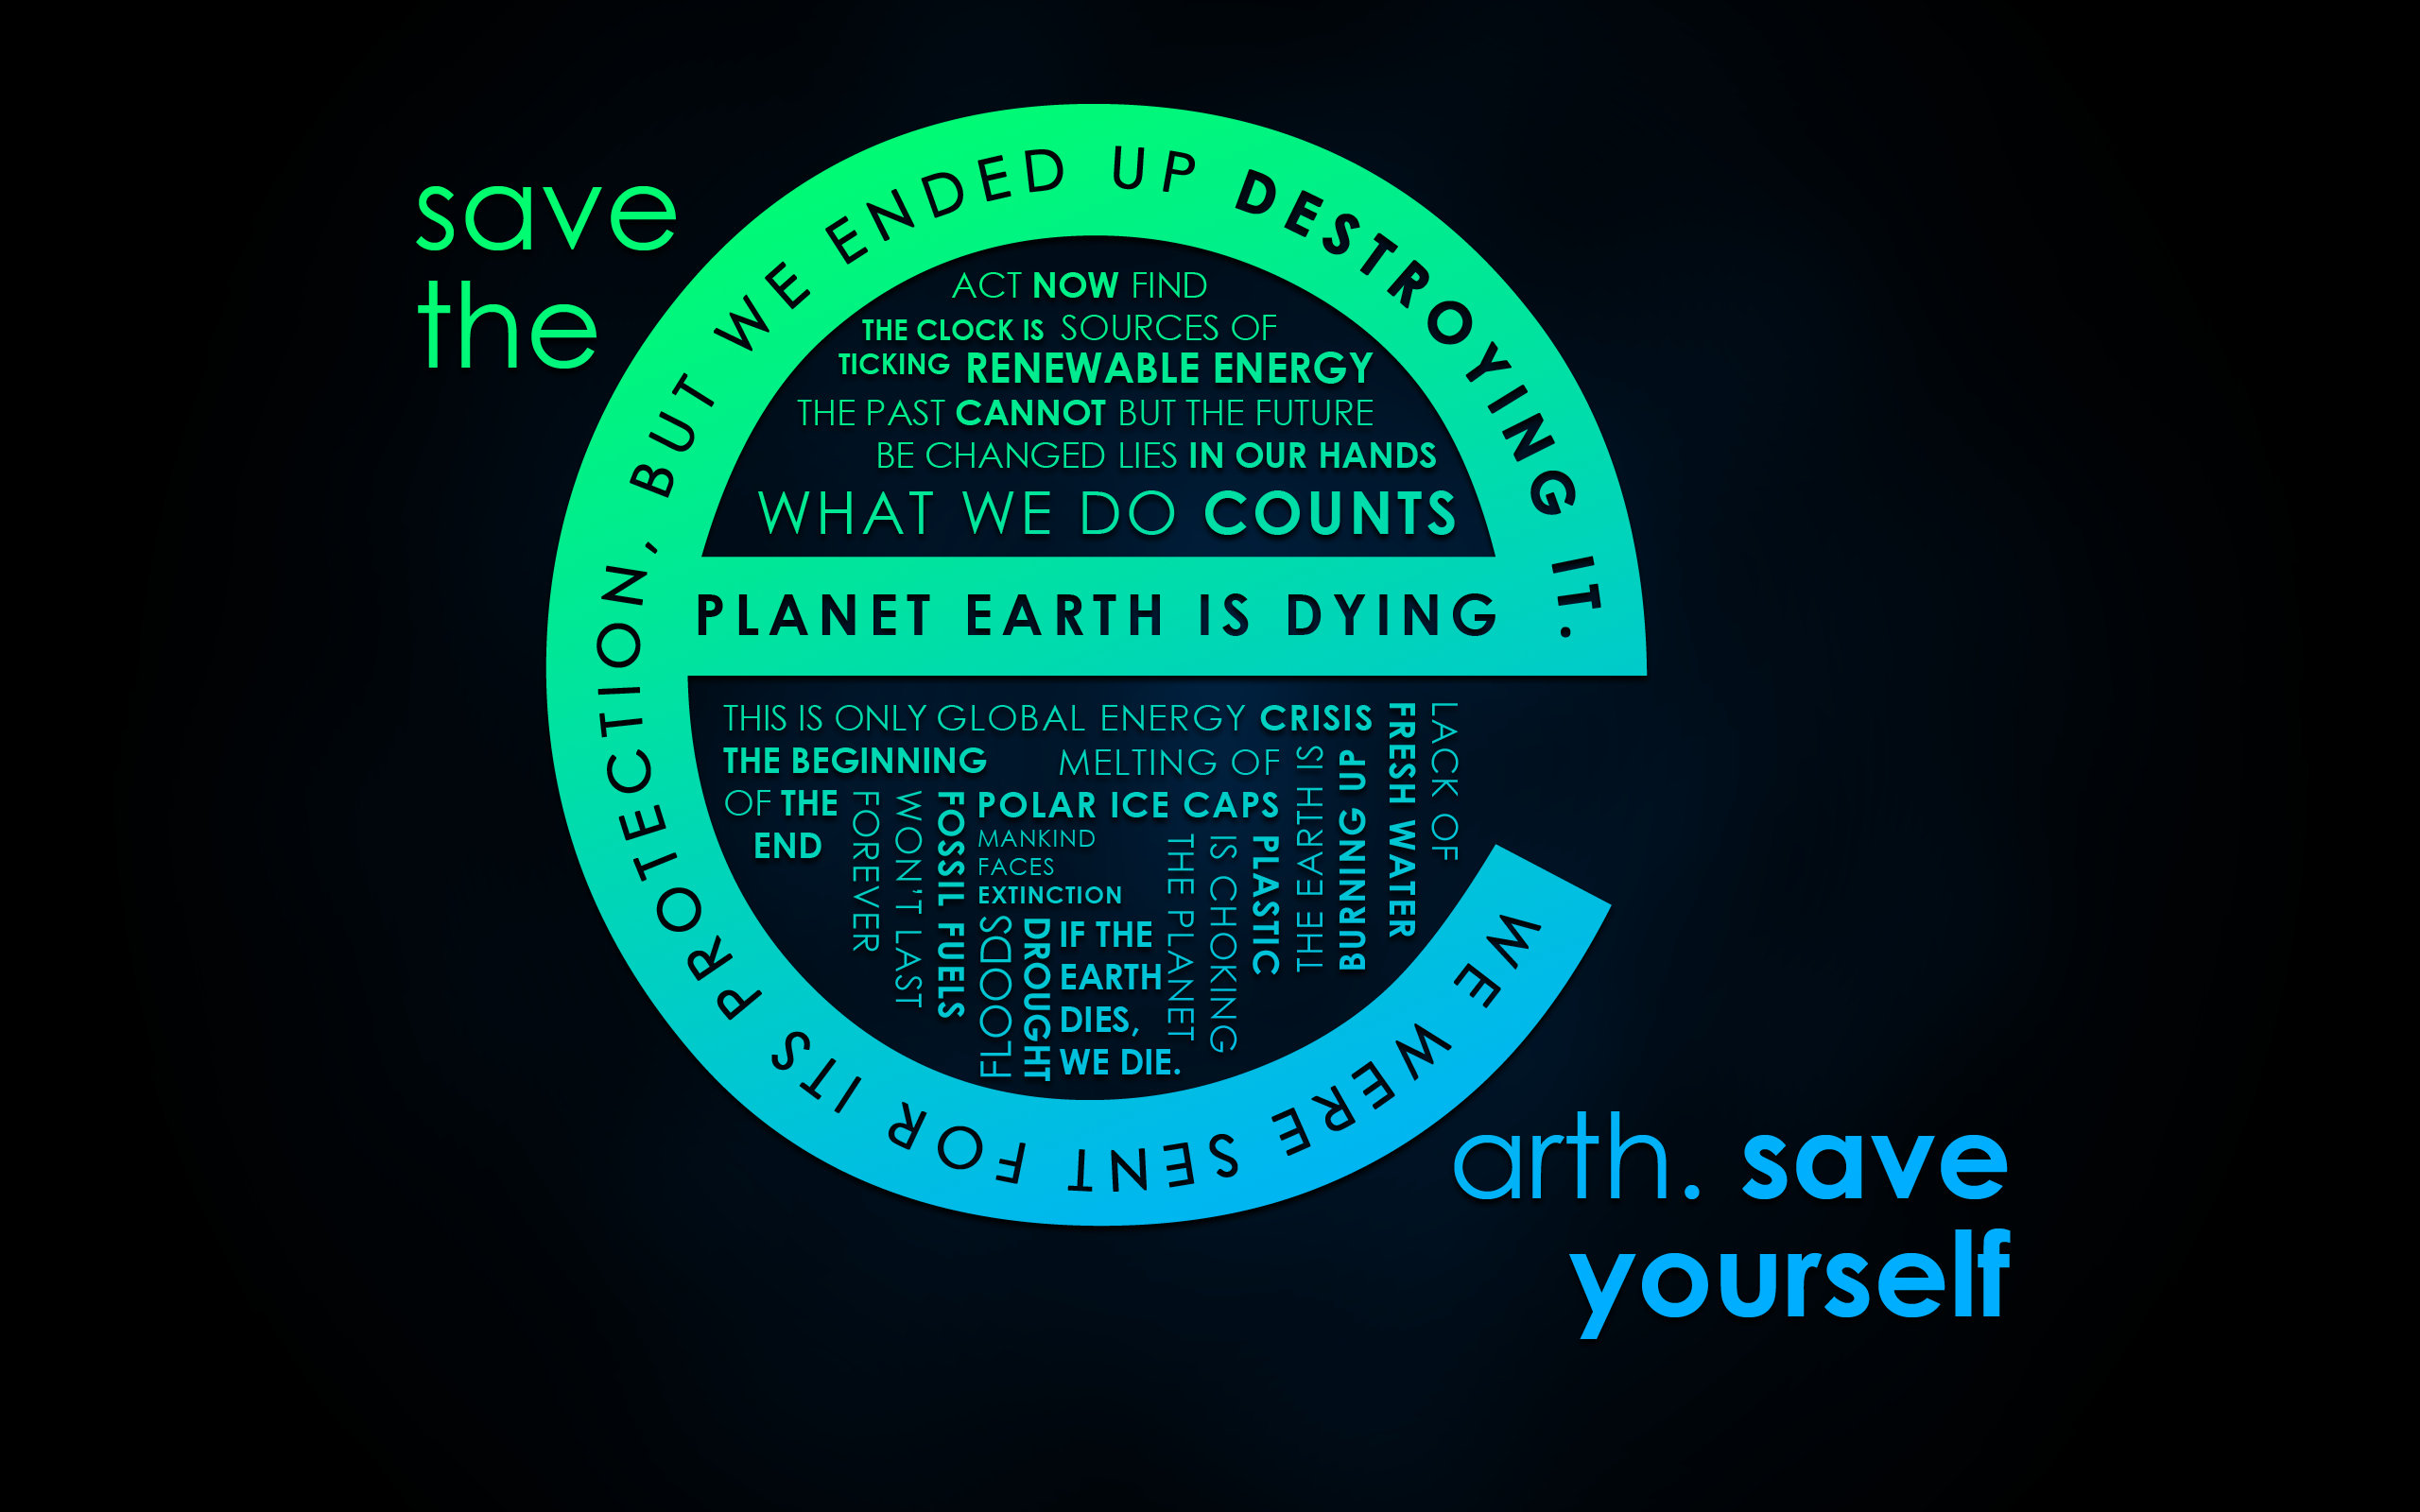 Save the earth wallpaper background